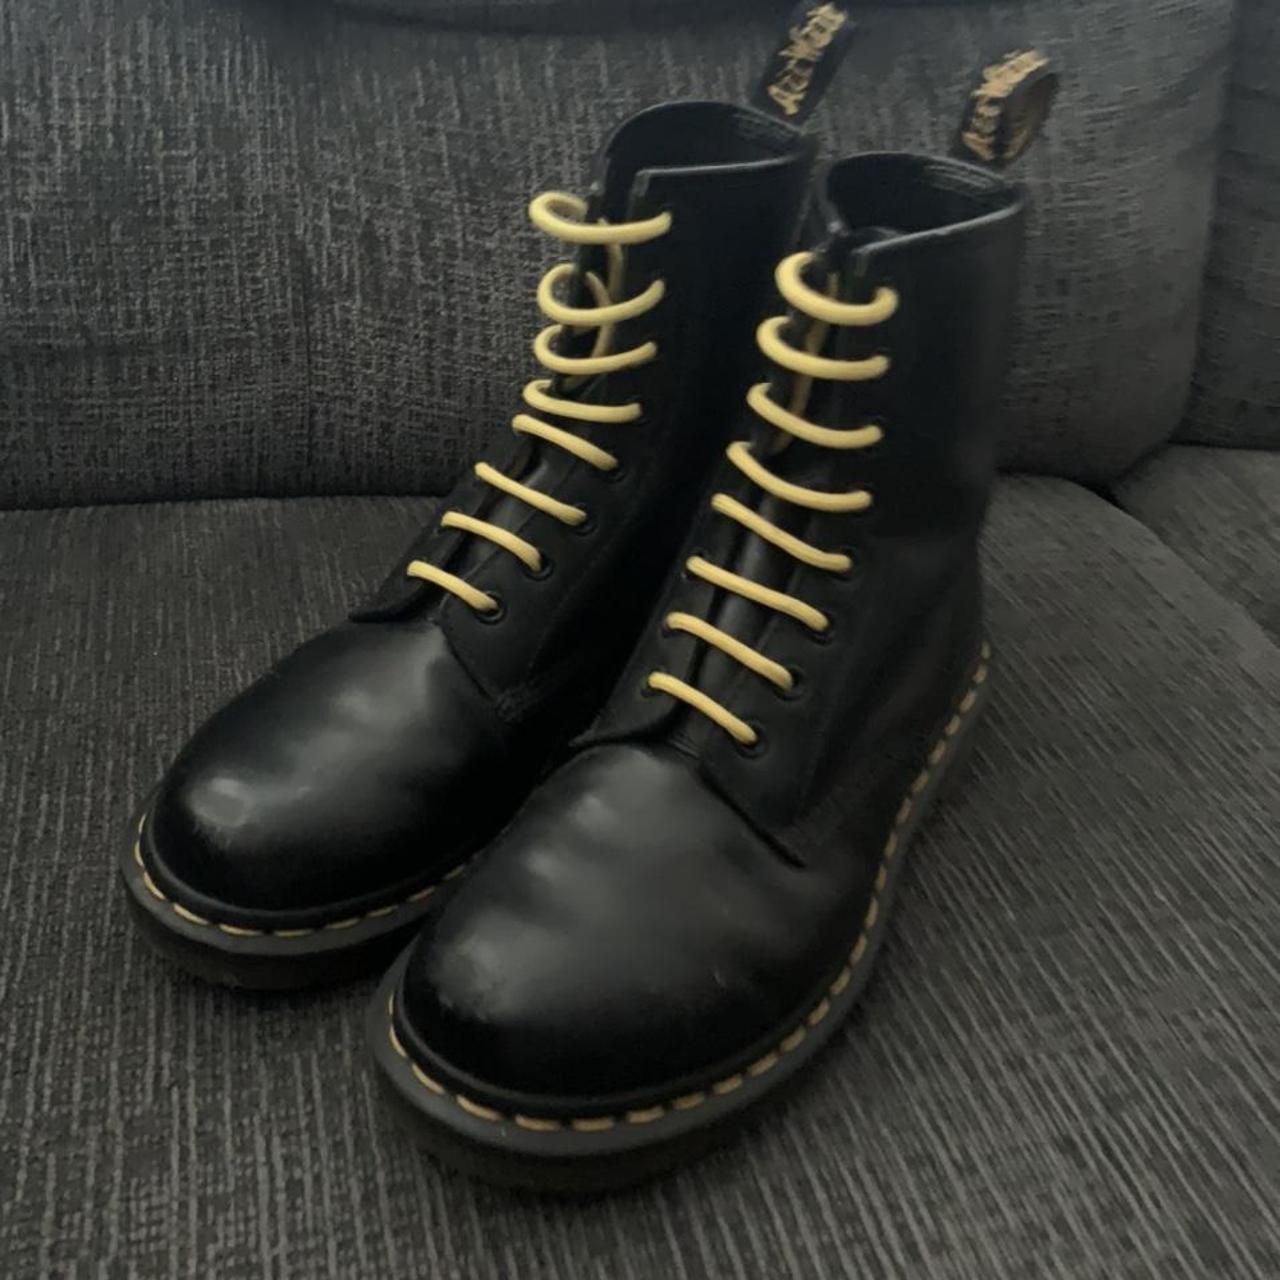 stack Ash Theory of relativity Dr Martens 1460 - Black w/ yellow laces 🖤💛 Size... - Depop